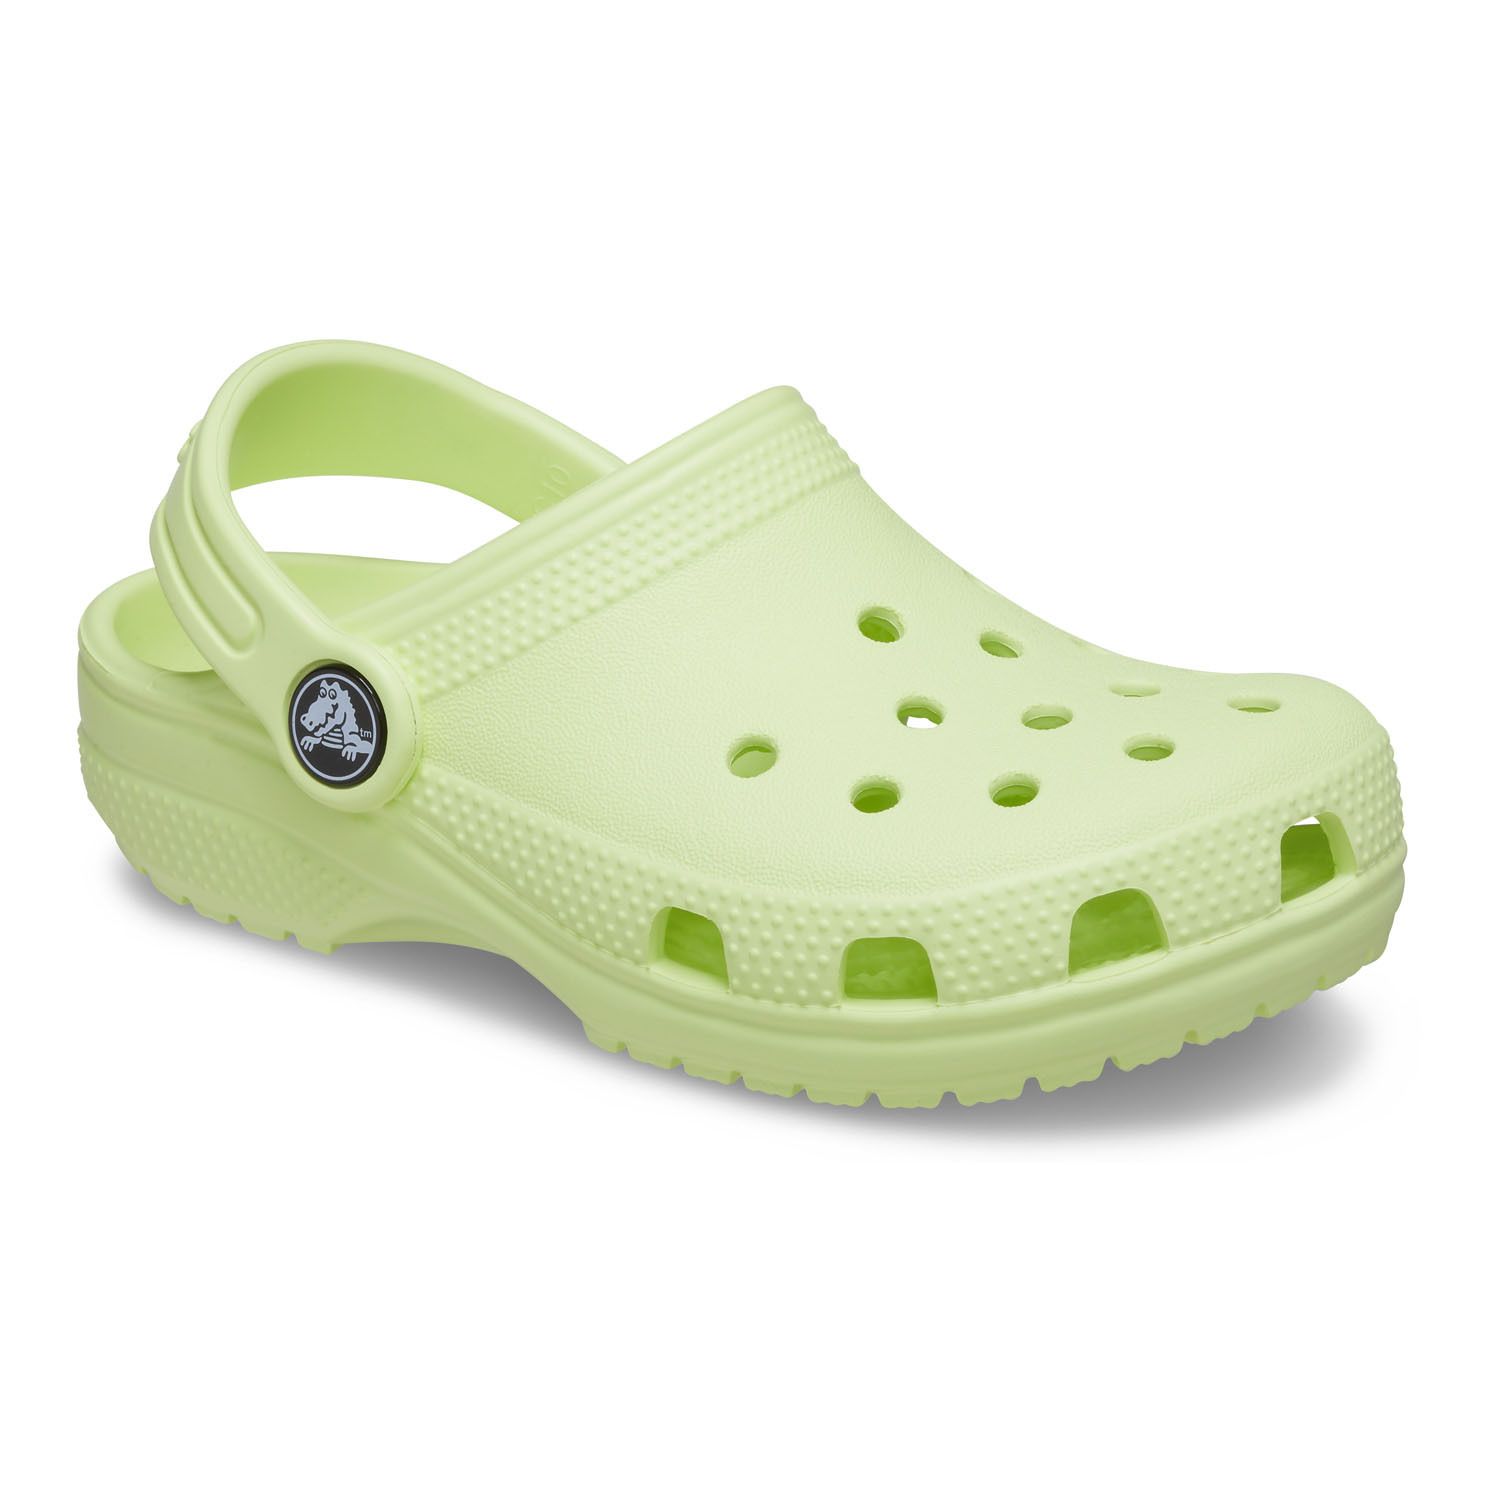 Crocs Shoes \u0026 Sandals: Casual Style for 